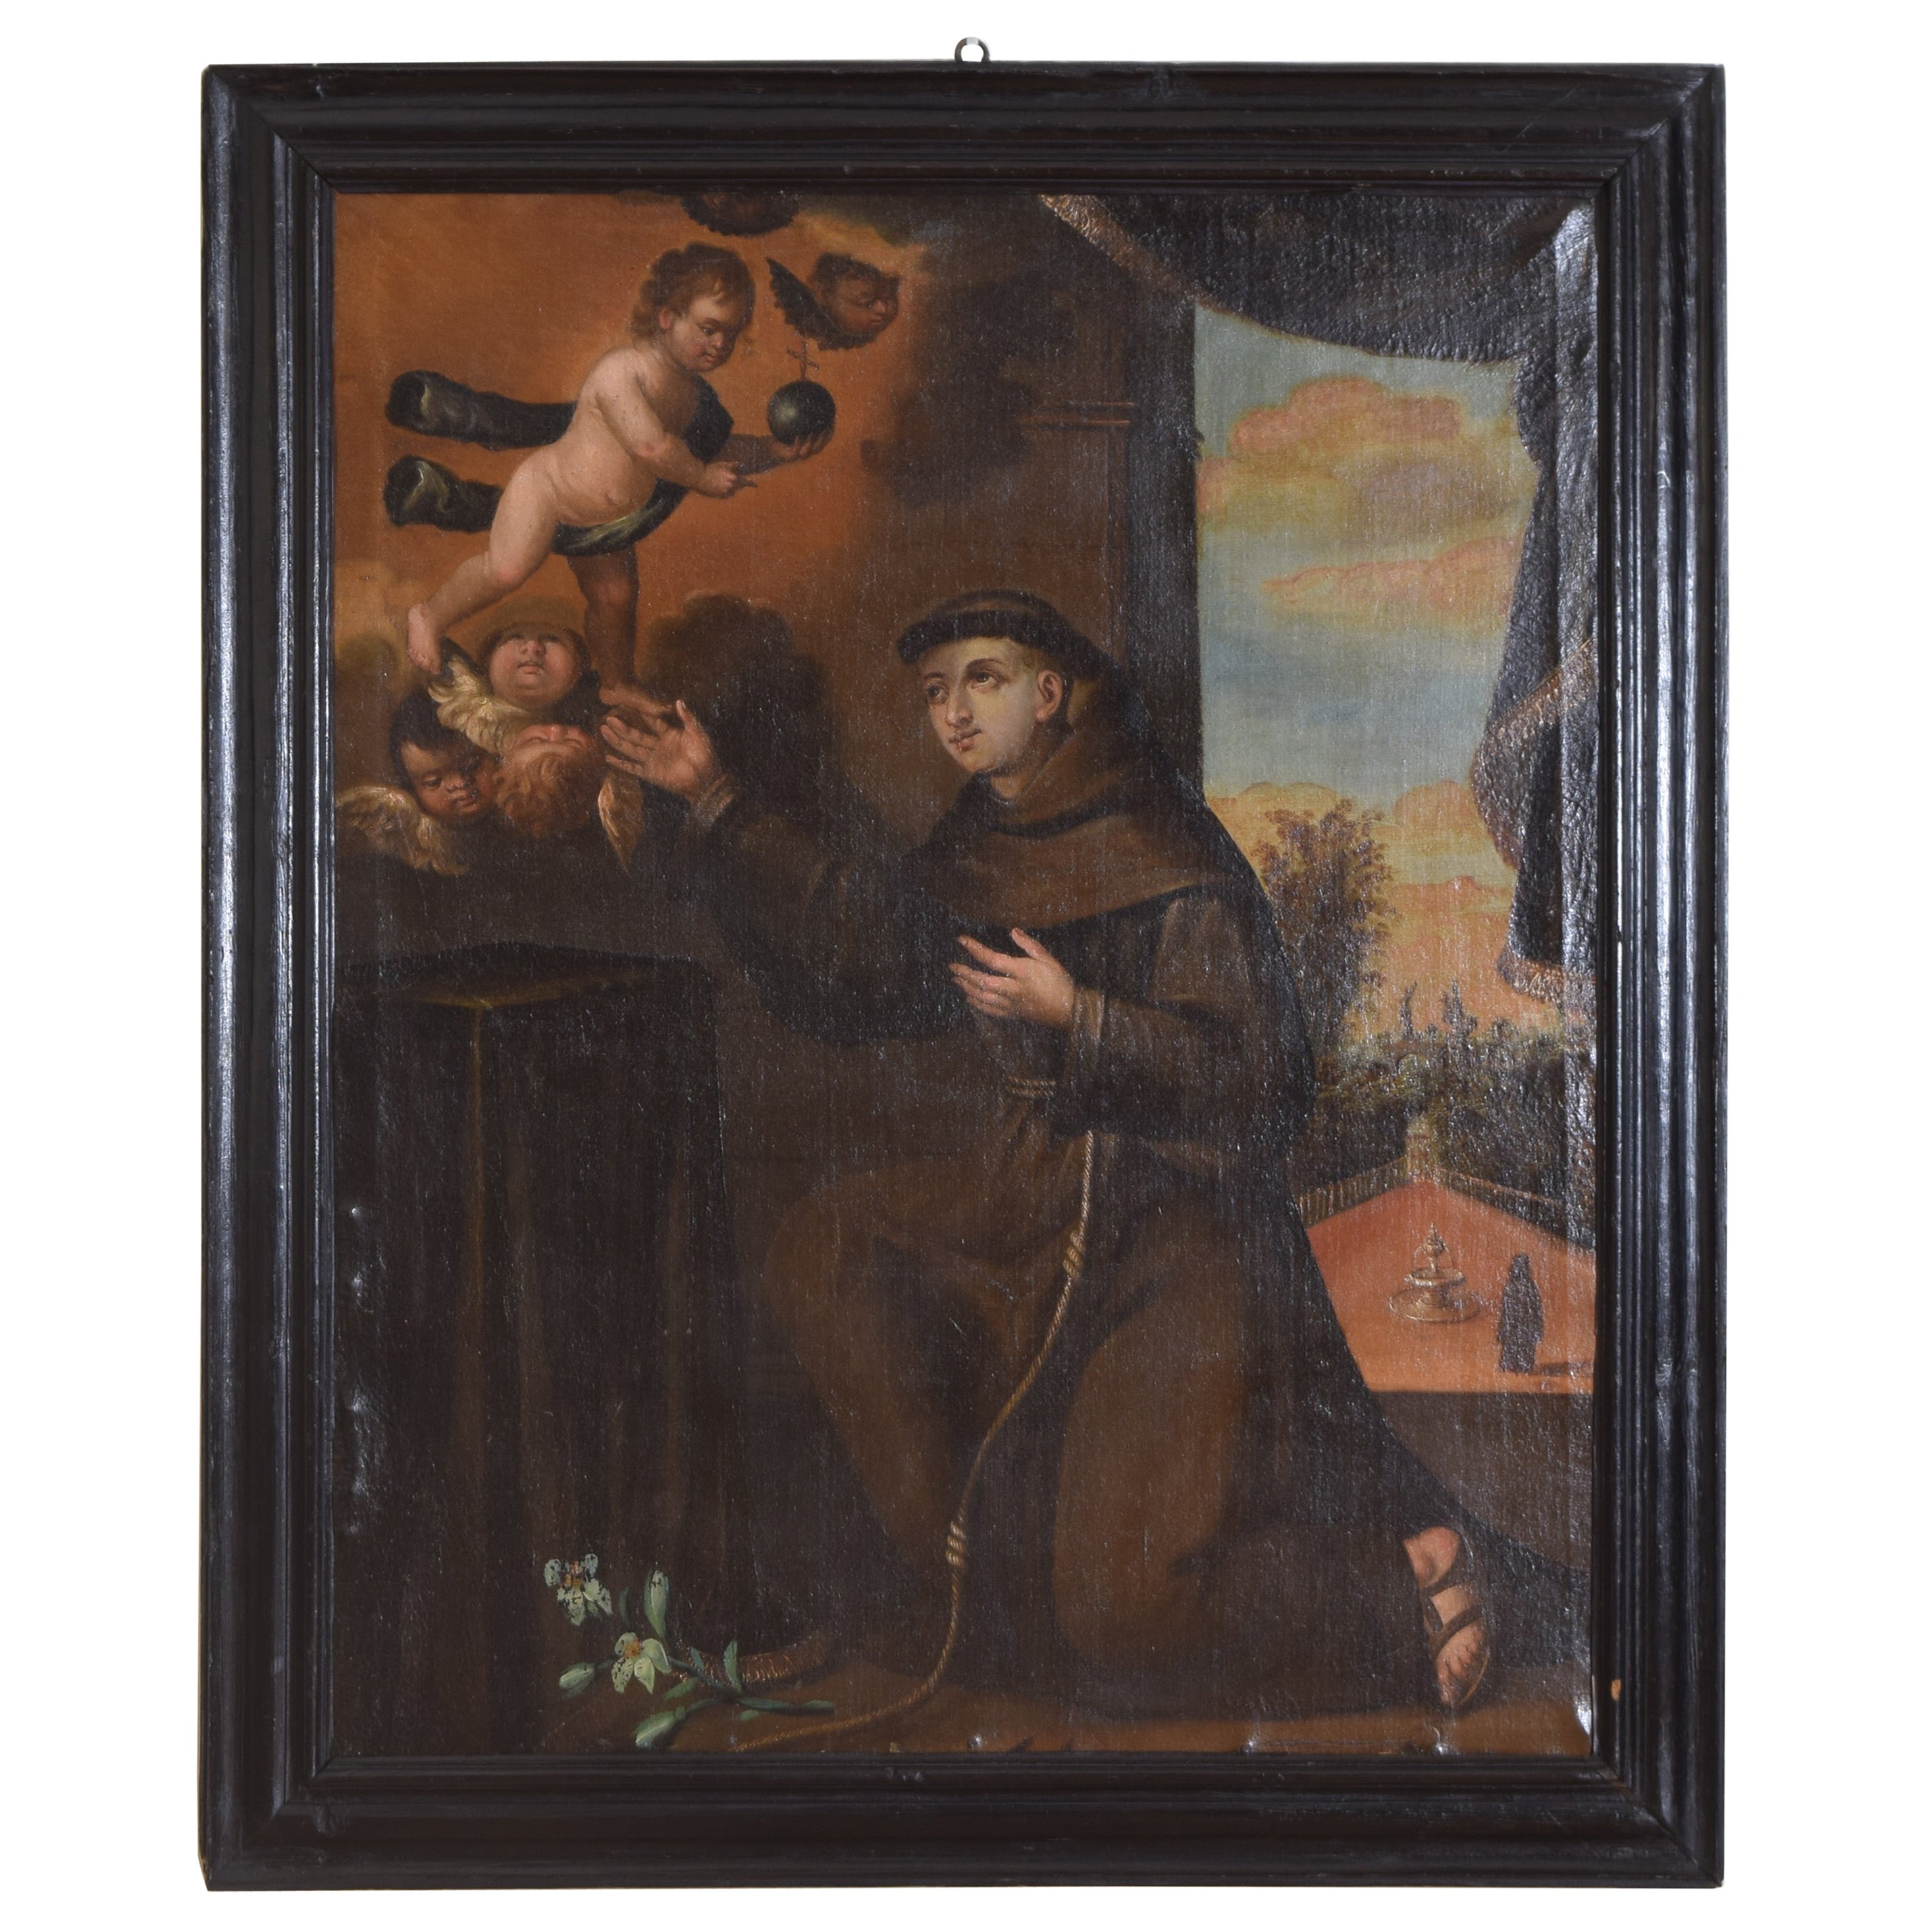 Spanish or Pourtuguse Large Oil on Canvas, "Saint Anthony", Mid-17th Century For Sale